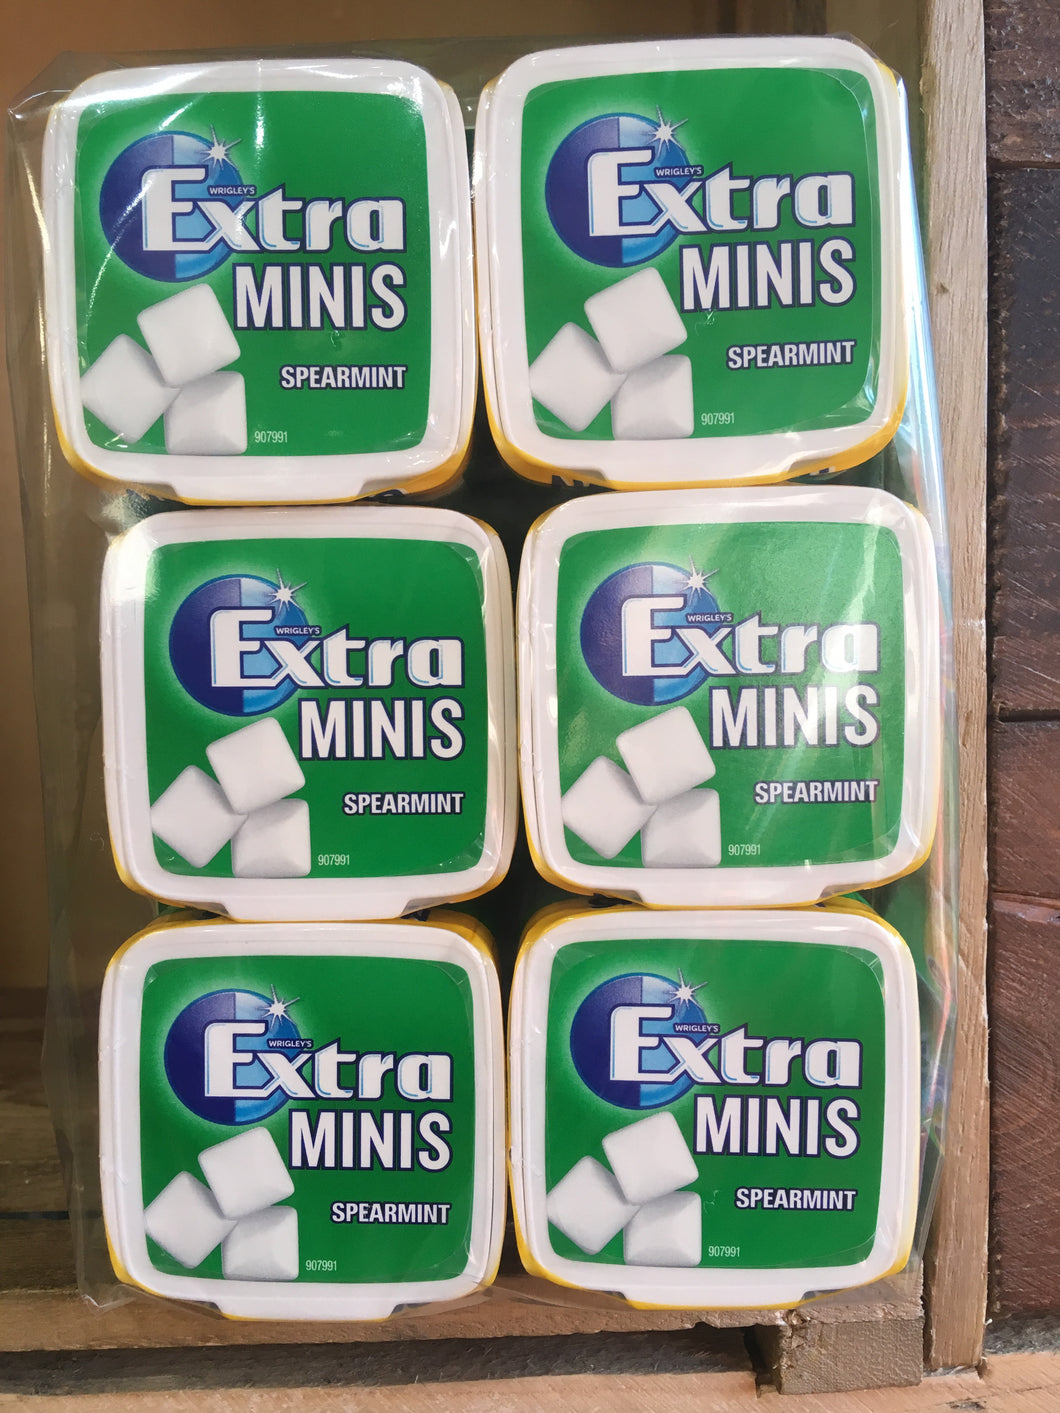 6x Tubs of Wrigley's Extra Minis Spearmint Chewing Gum x100 Pieces